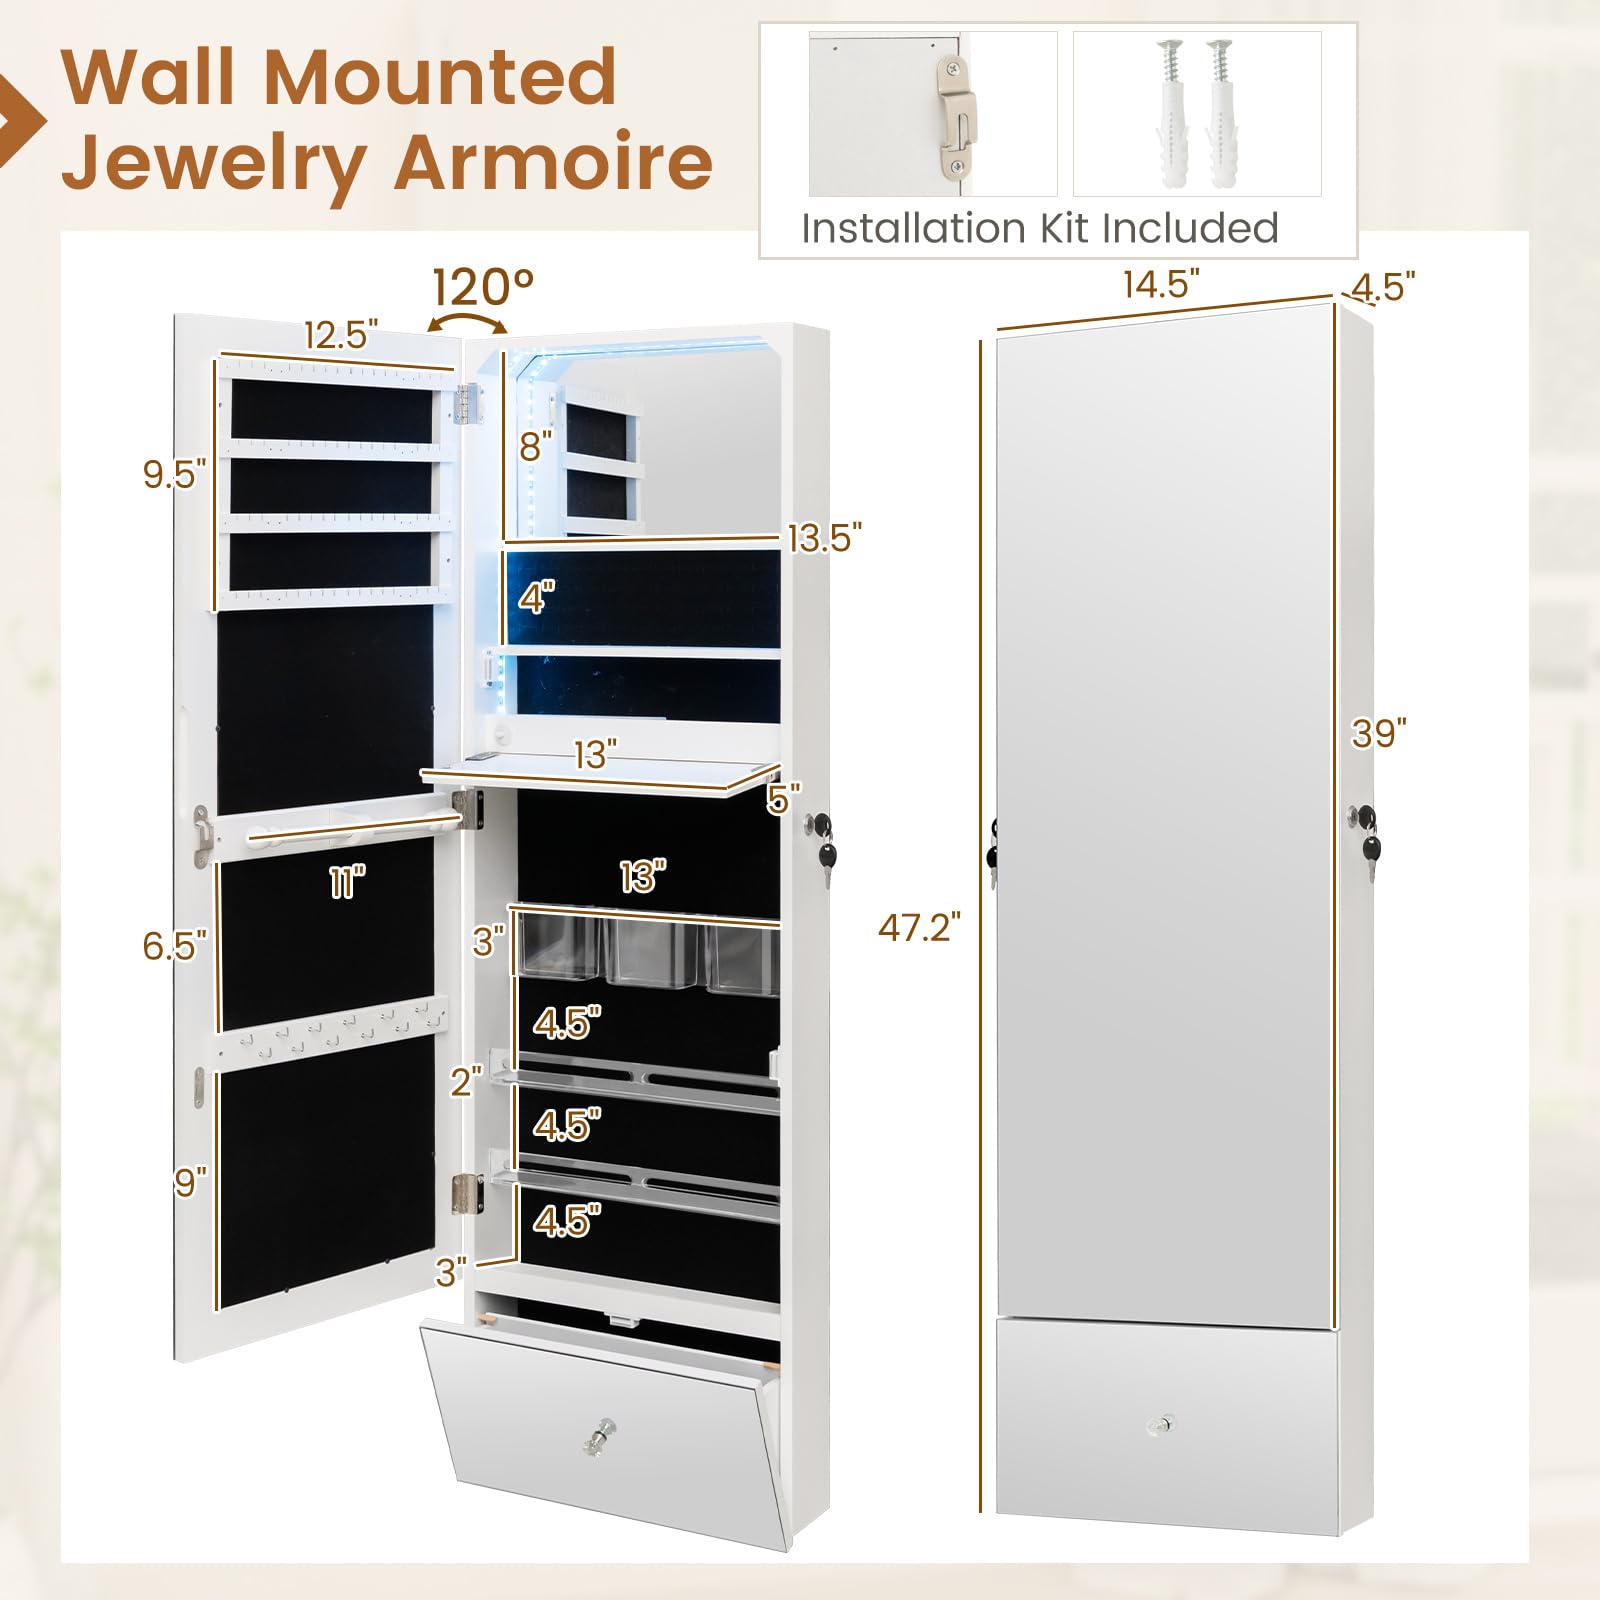 CHARMAID Jewelry Cabinet Wall Mounted, 47.2" Full Length Mirror, Lockable Jewelry Armoire with Tip out Storage Drawer